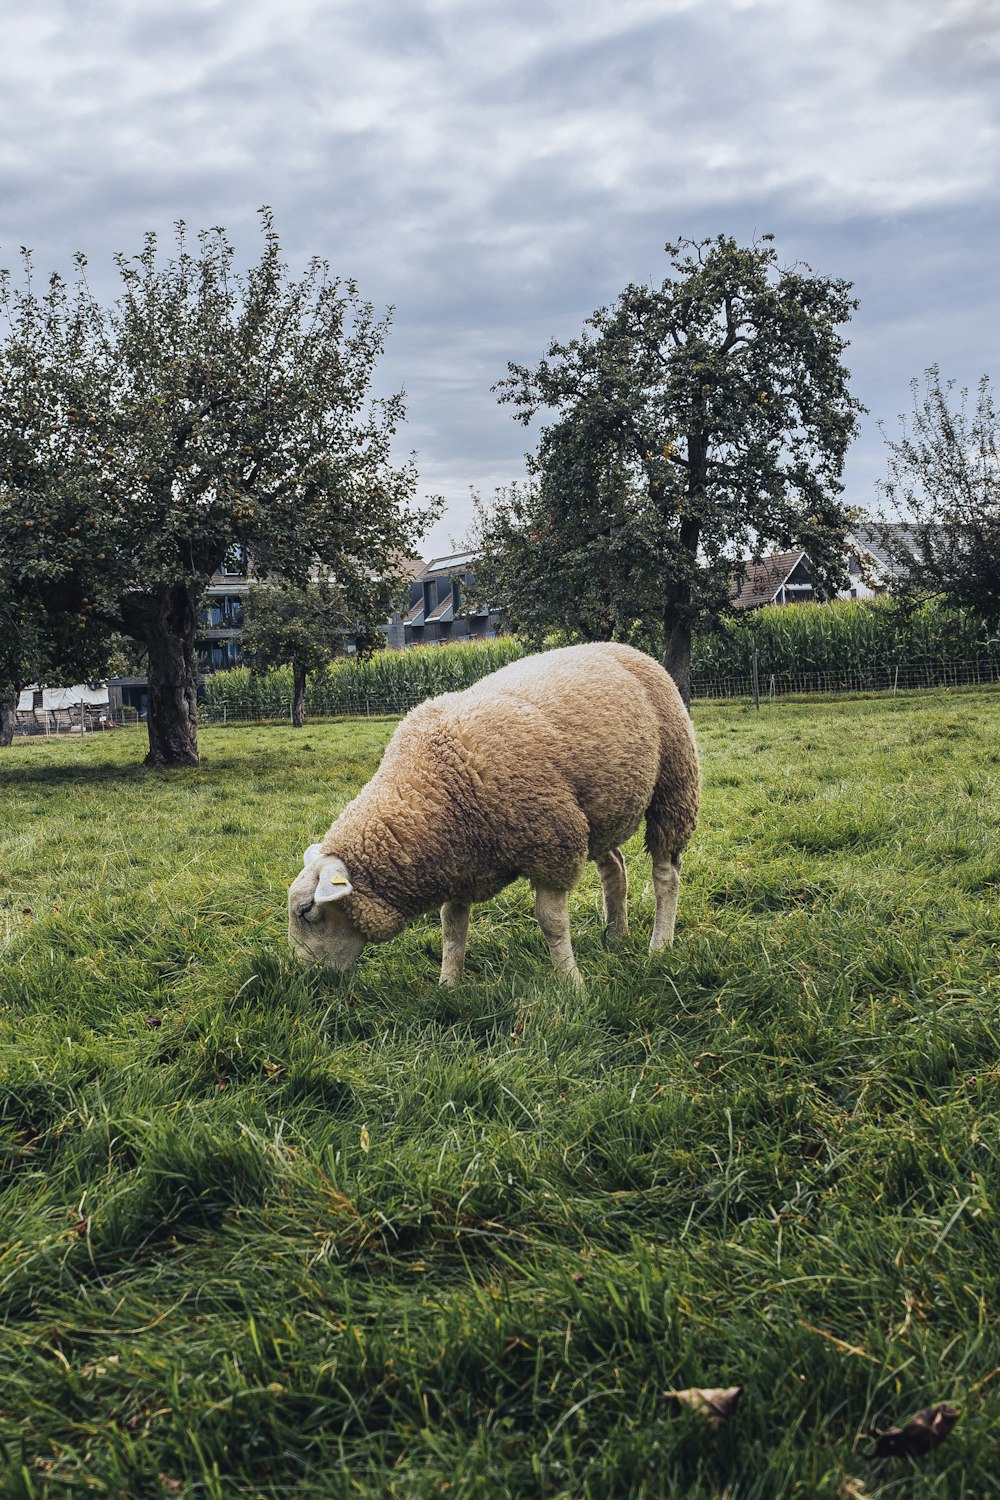 a sheep grazing in a grassy field with trees in the background